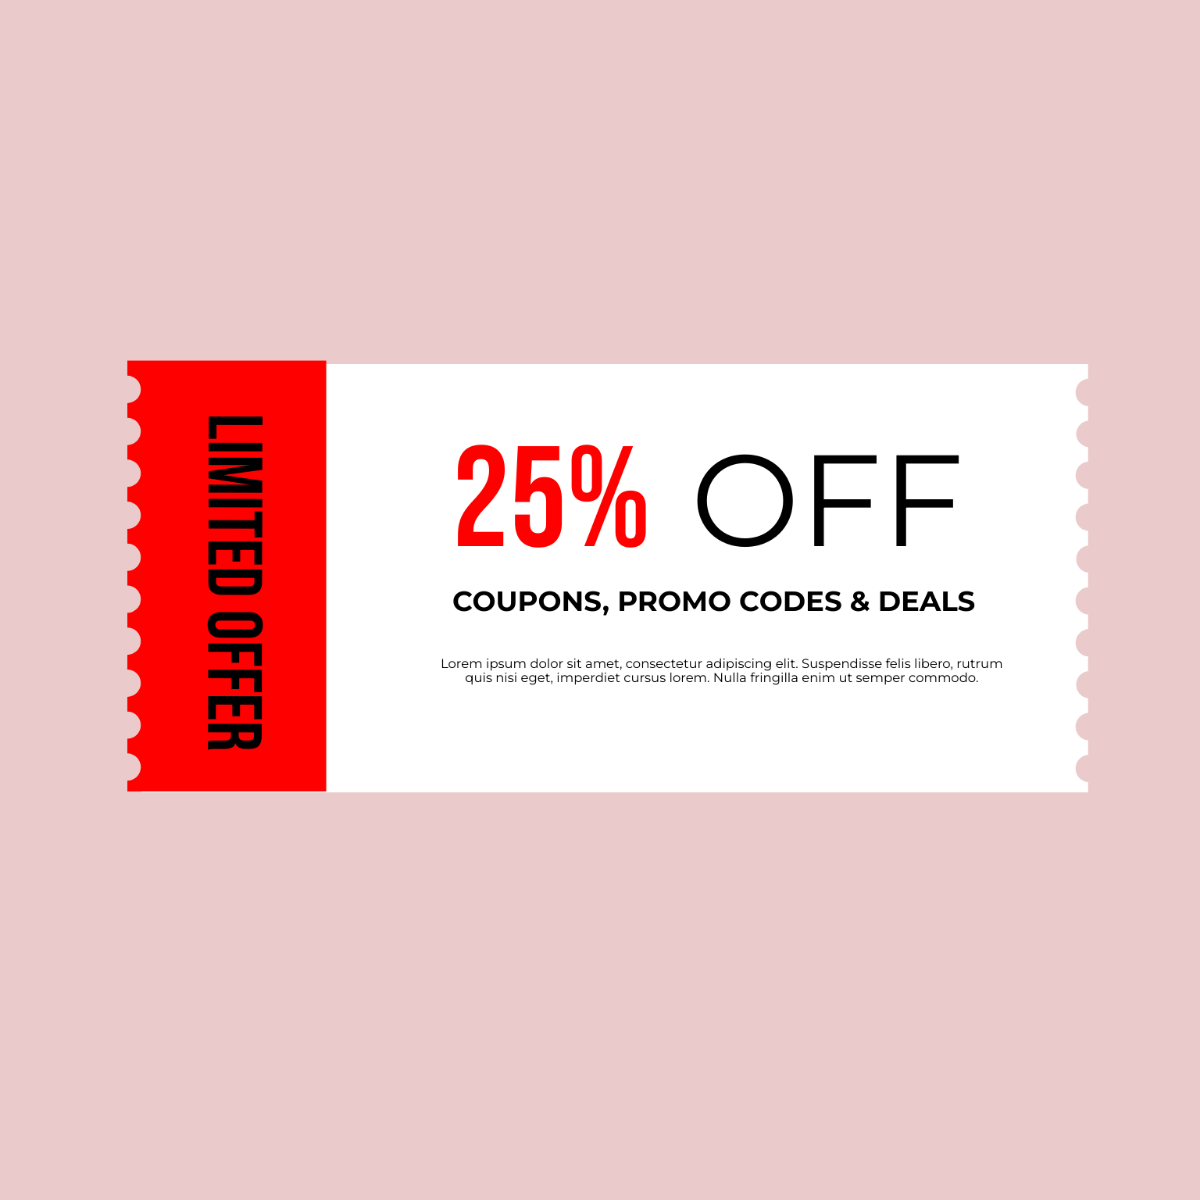 Free Coupon Offer Vector Template